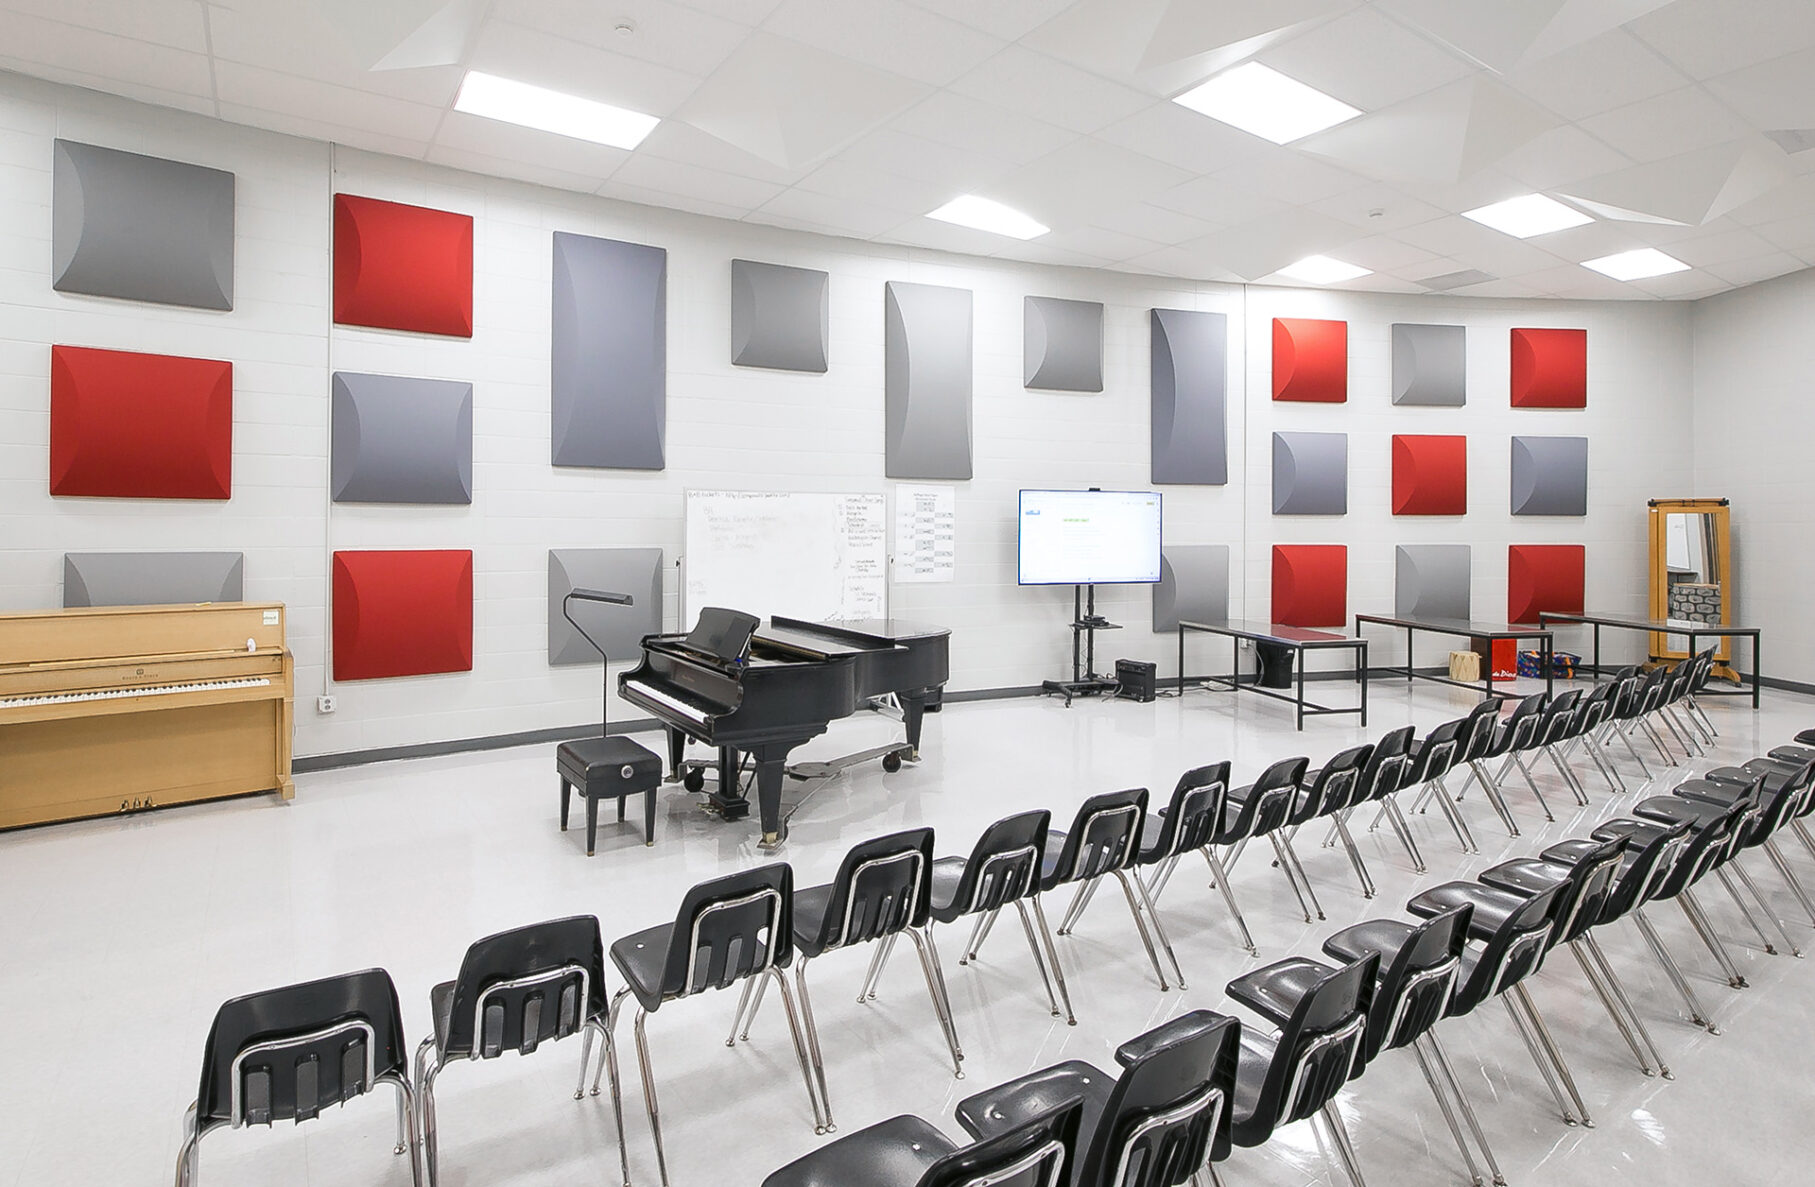 The music room at Emporia High School, a McCownGordon project.